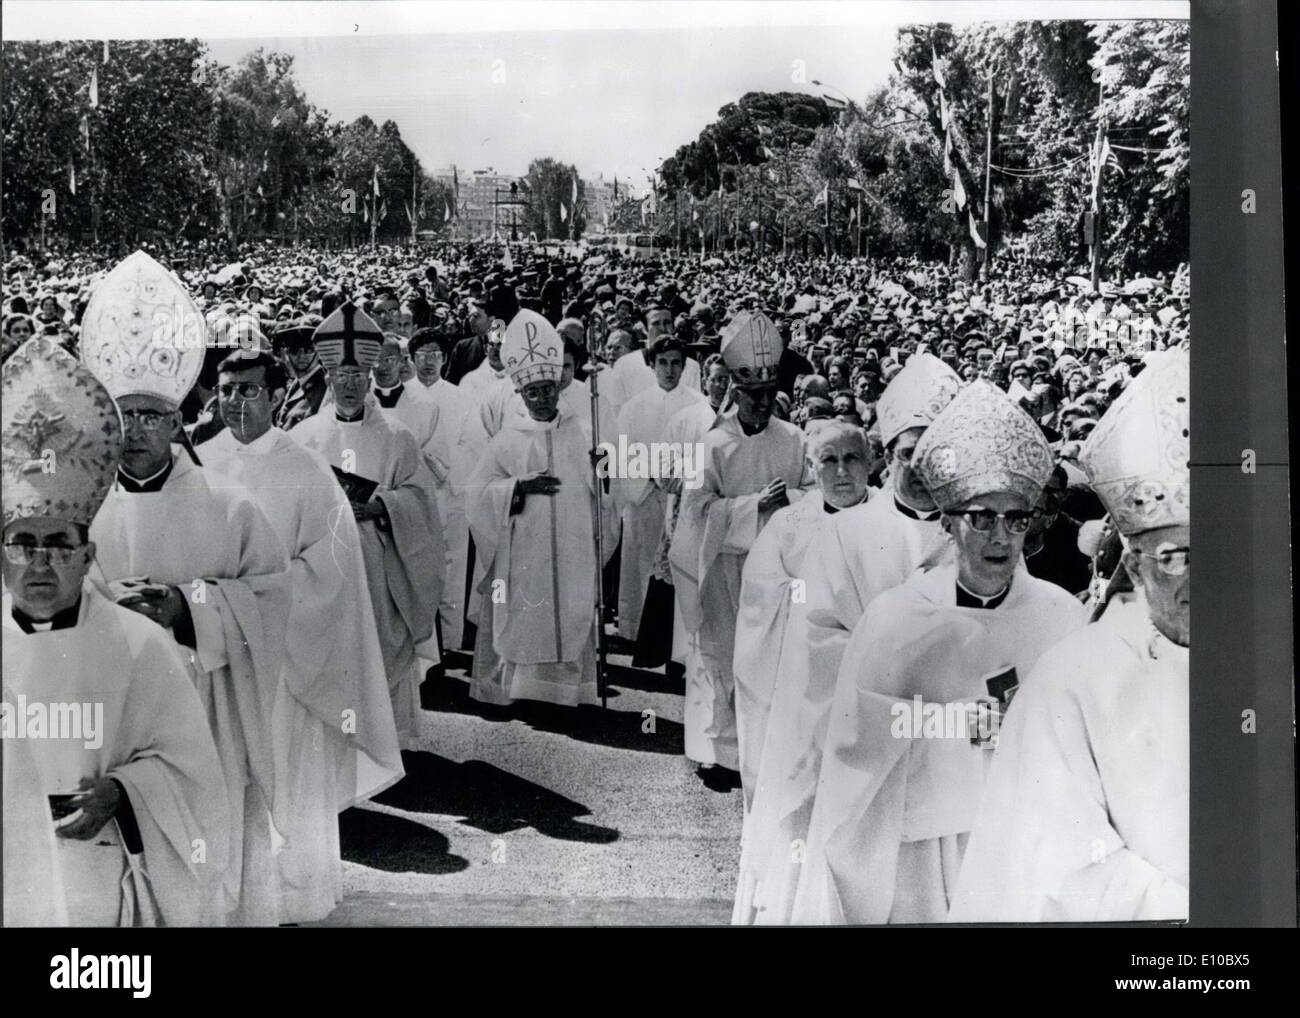 Jun. 01, 1972 - Eucharistic Congress In Valencia: Under the Presidency of General Franco, the VIII National Eucharistic Congress was officiated in Valencia. Photo Shows: General view at the Eucharistic Congress which opened in Valencia on May 29. Stock Photo